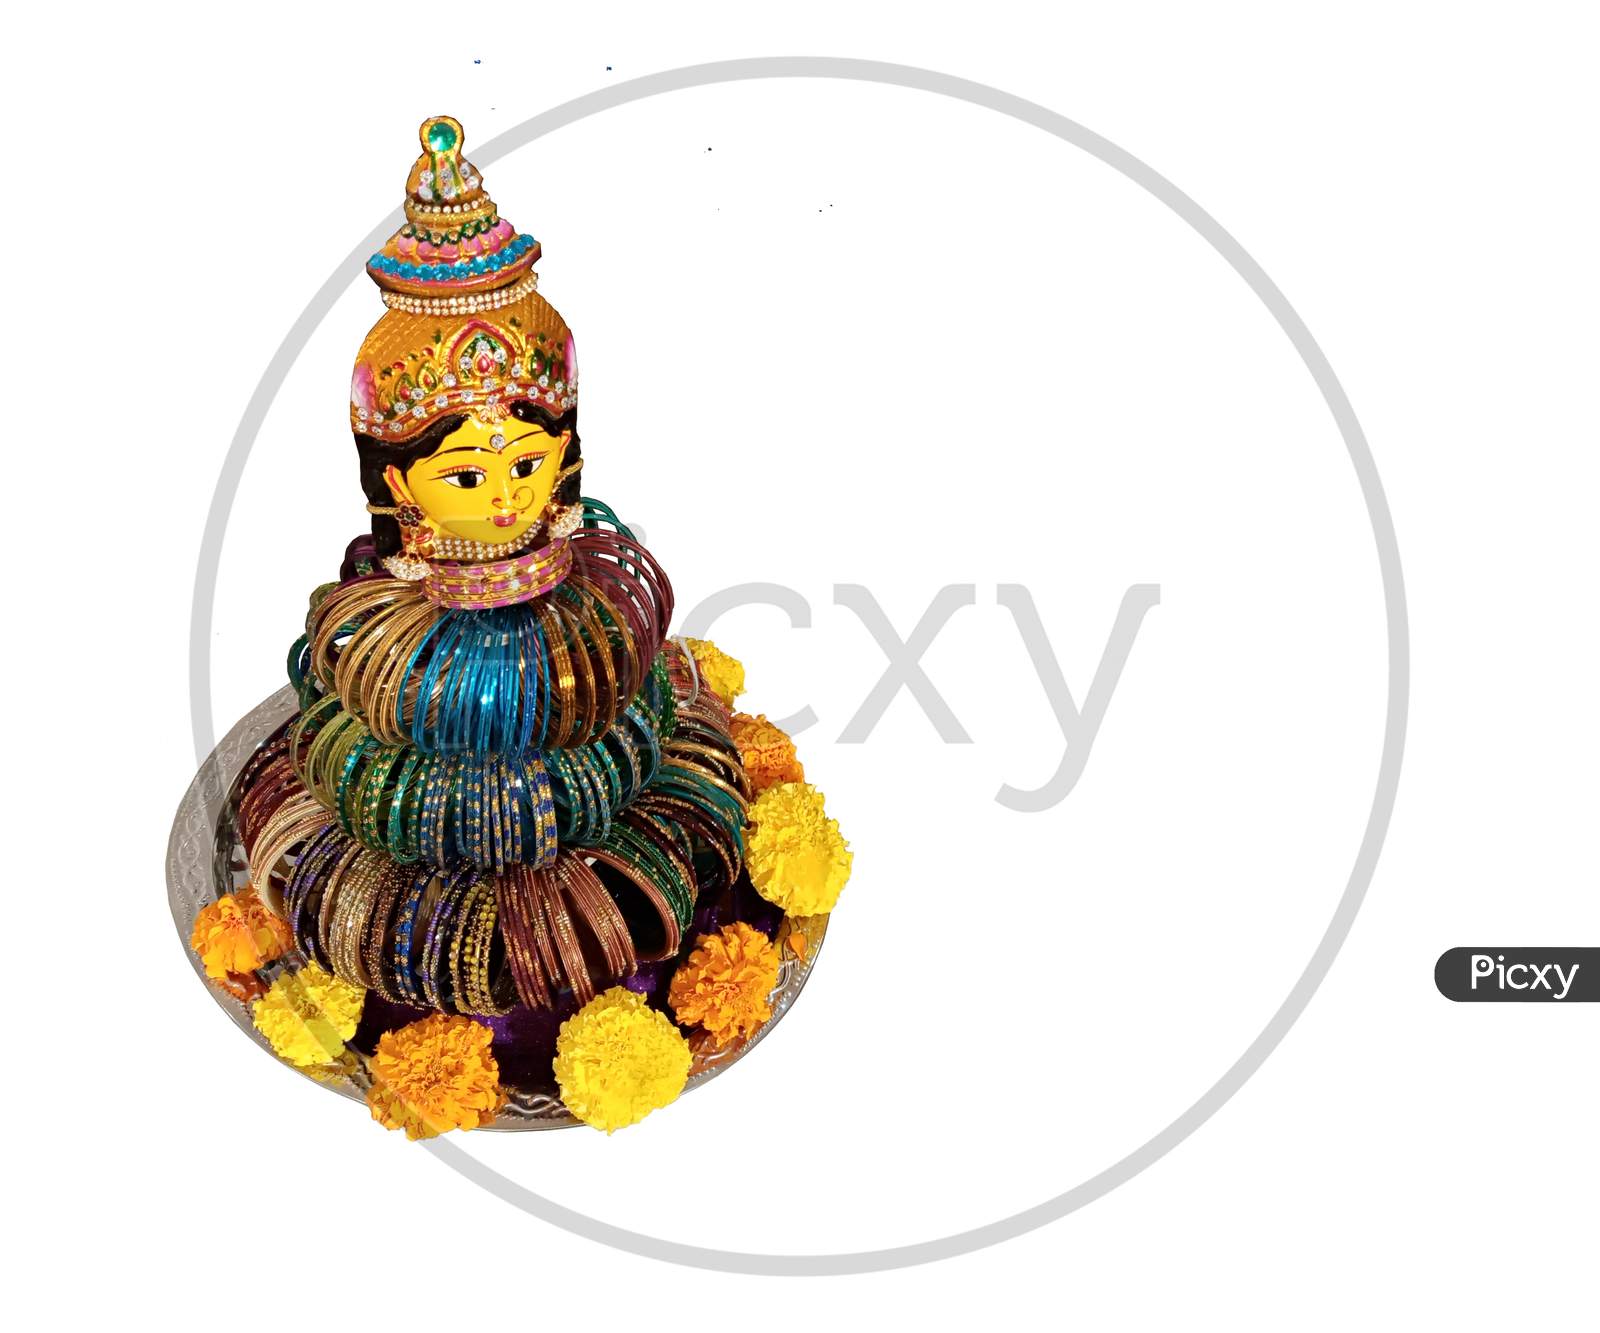 Isolated symbolic doll for bangle rituals in Indian weddings